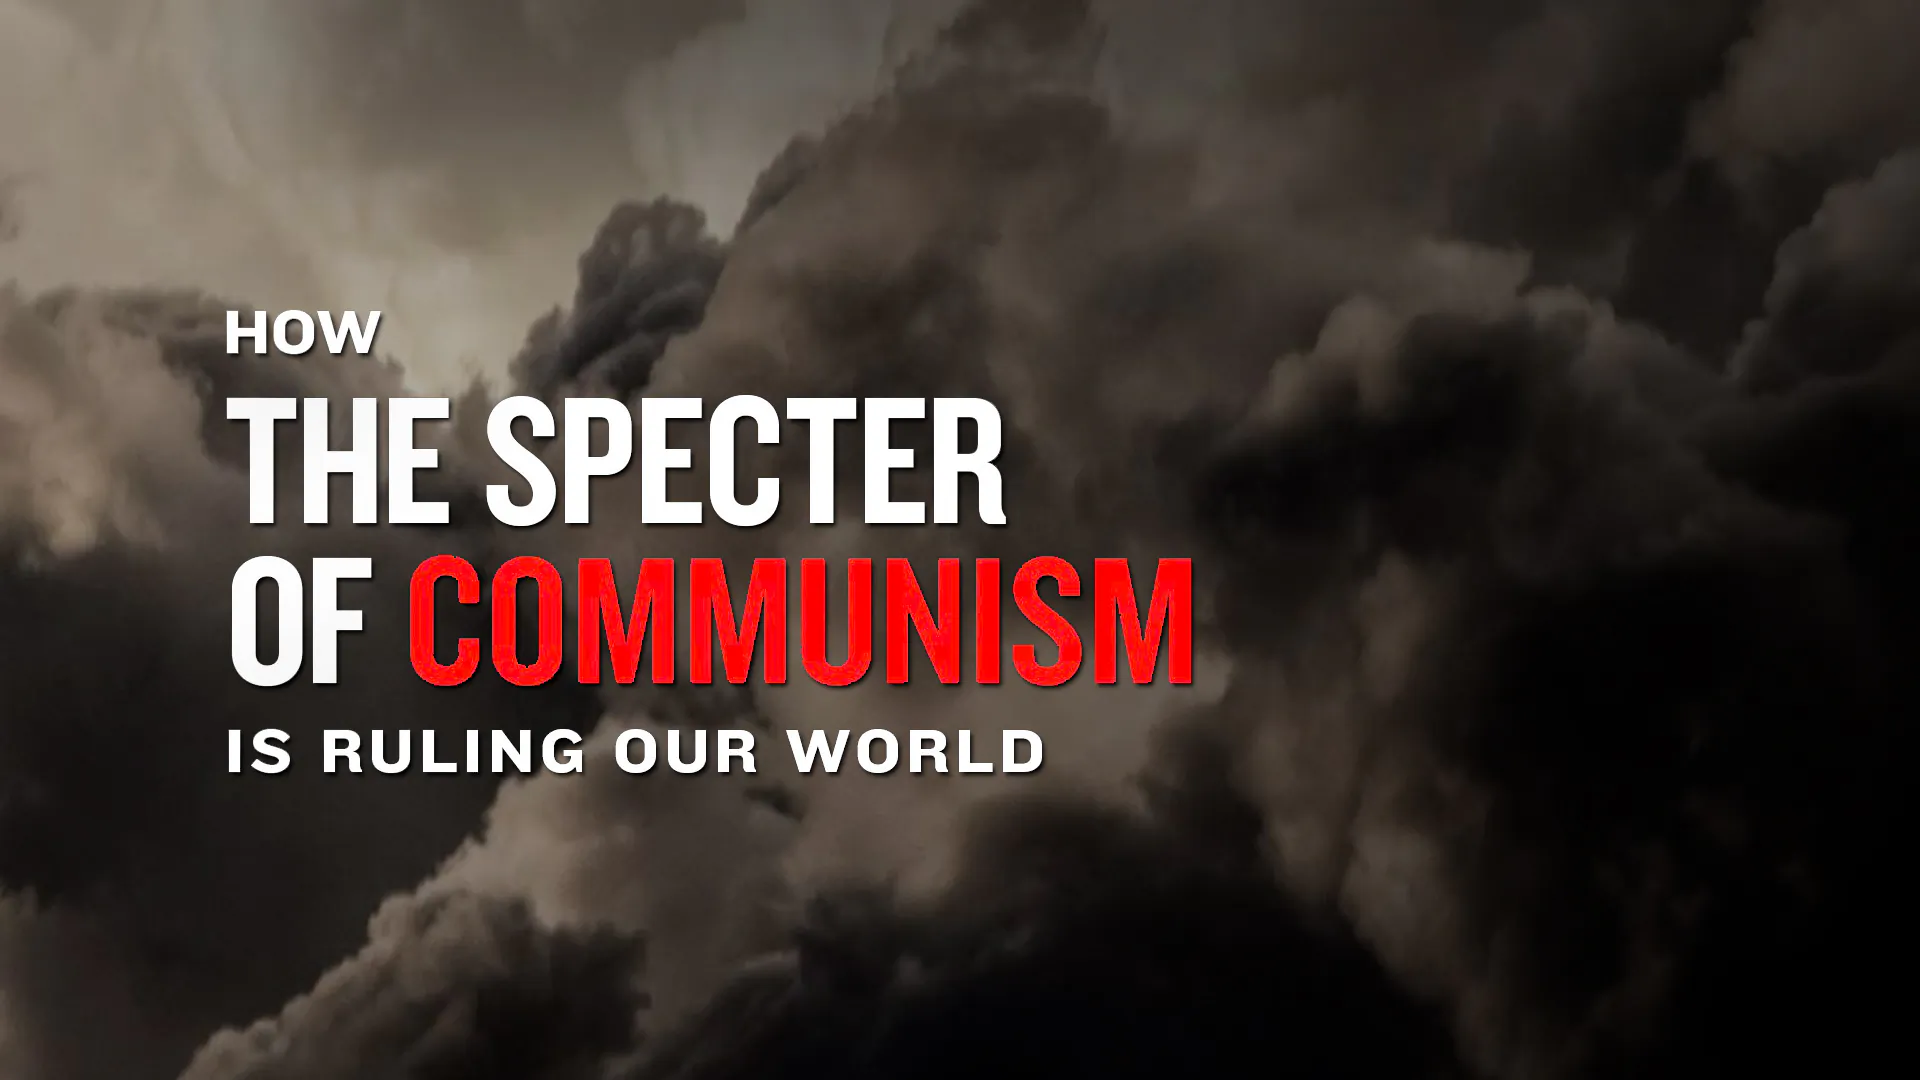 How the Specter of Communism is Ruling Our World